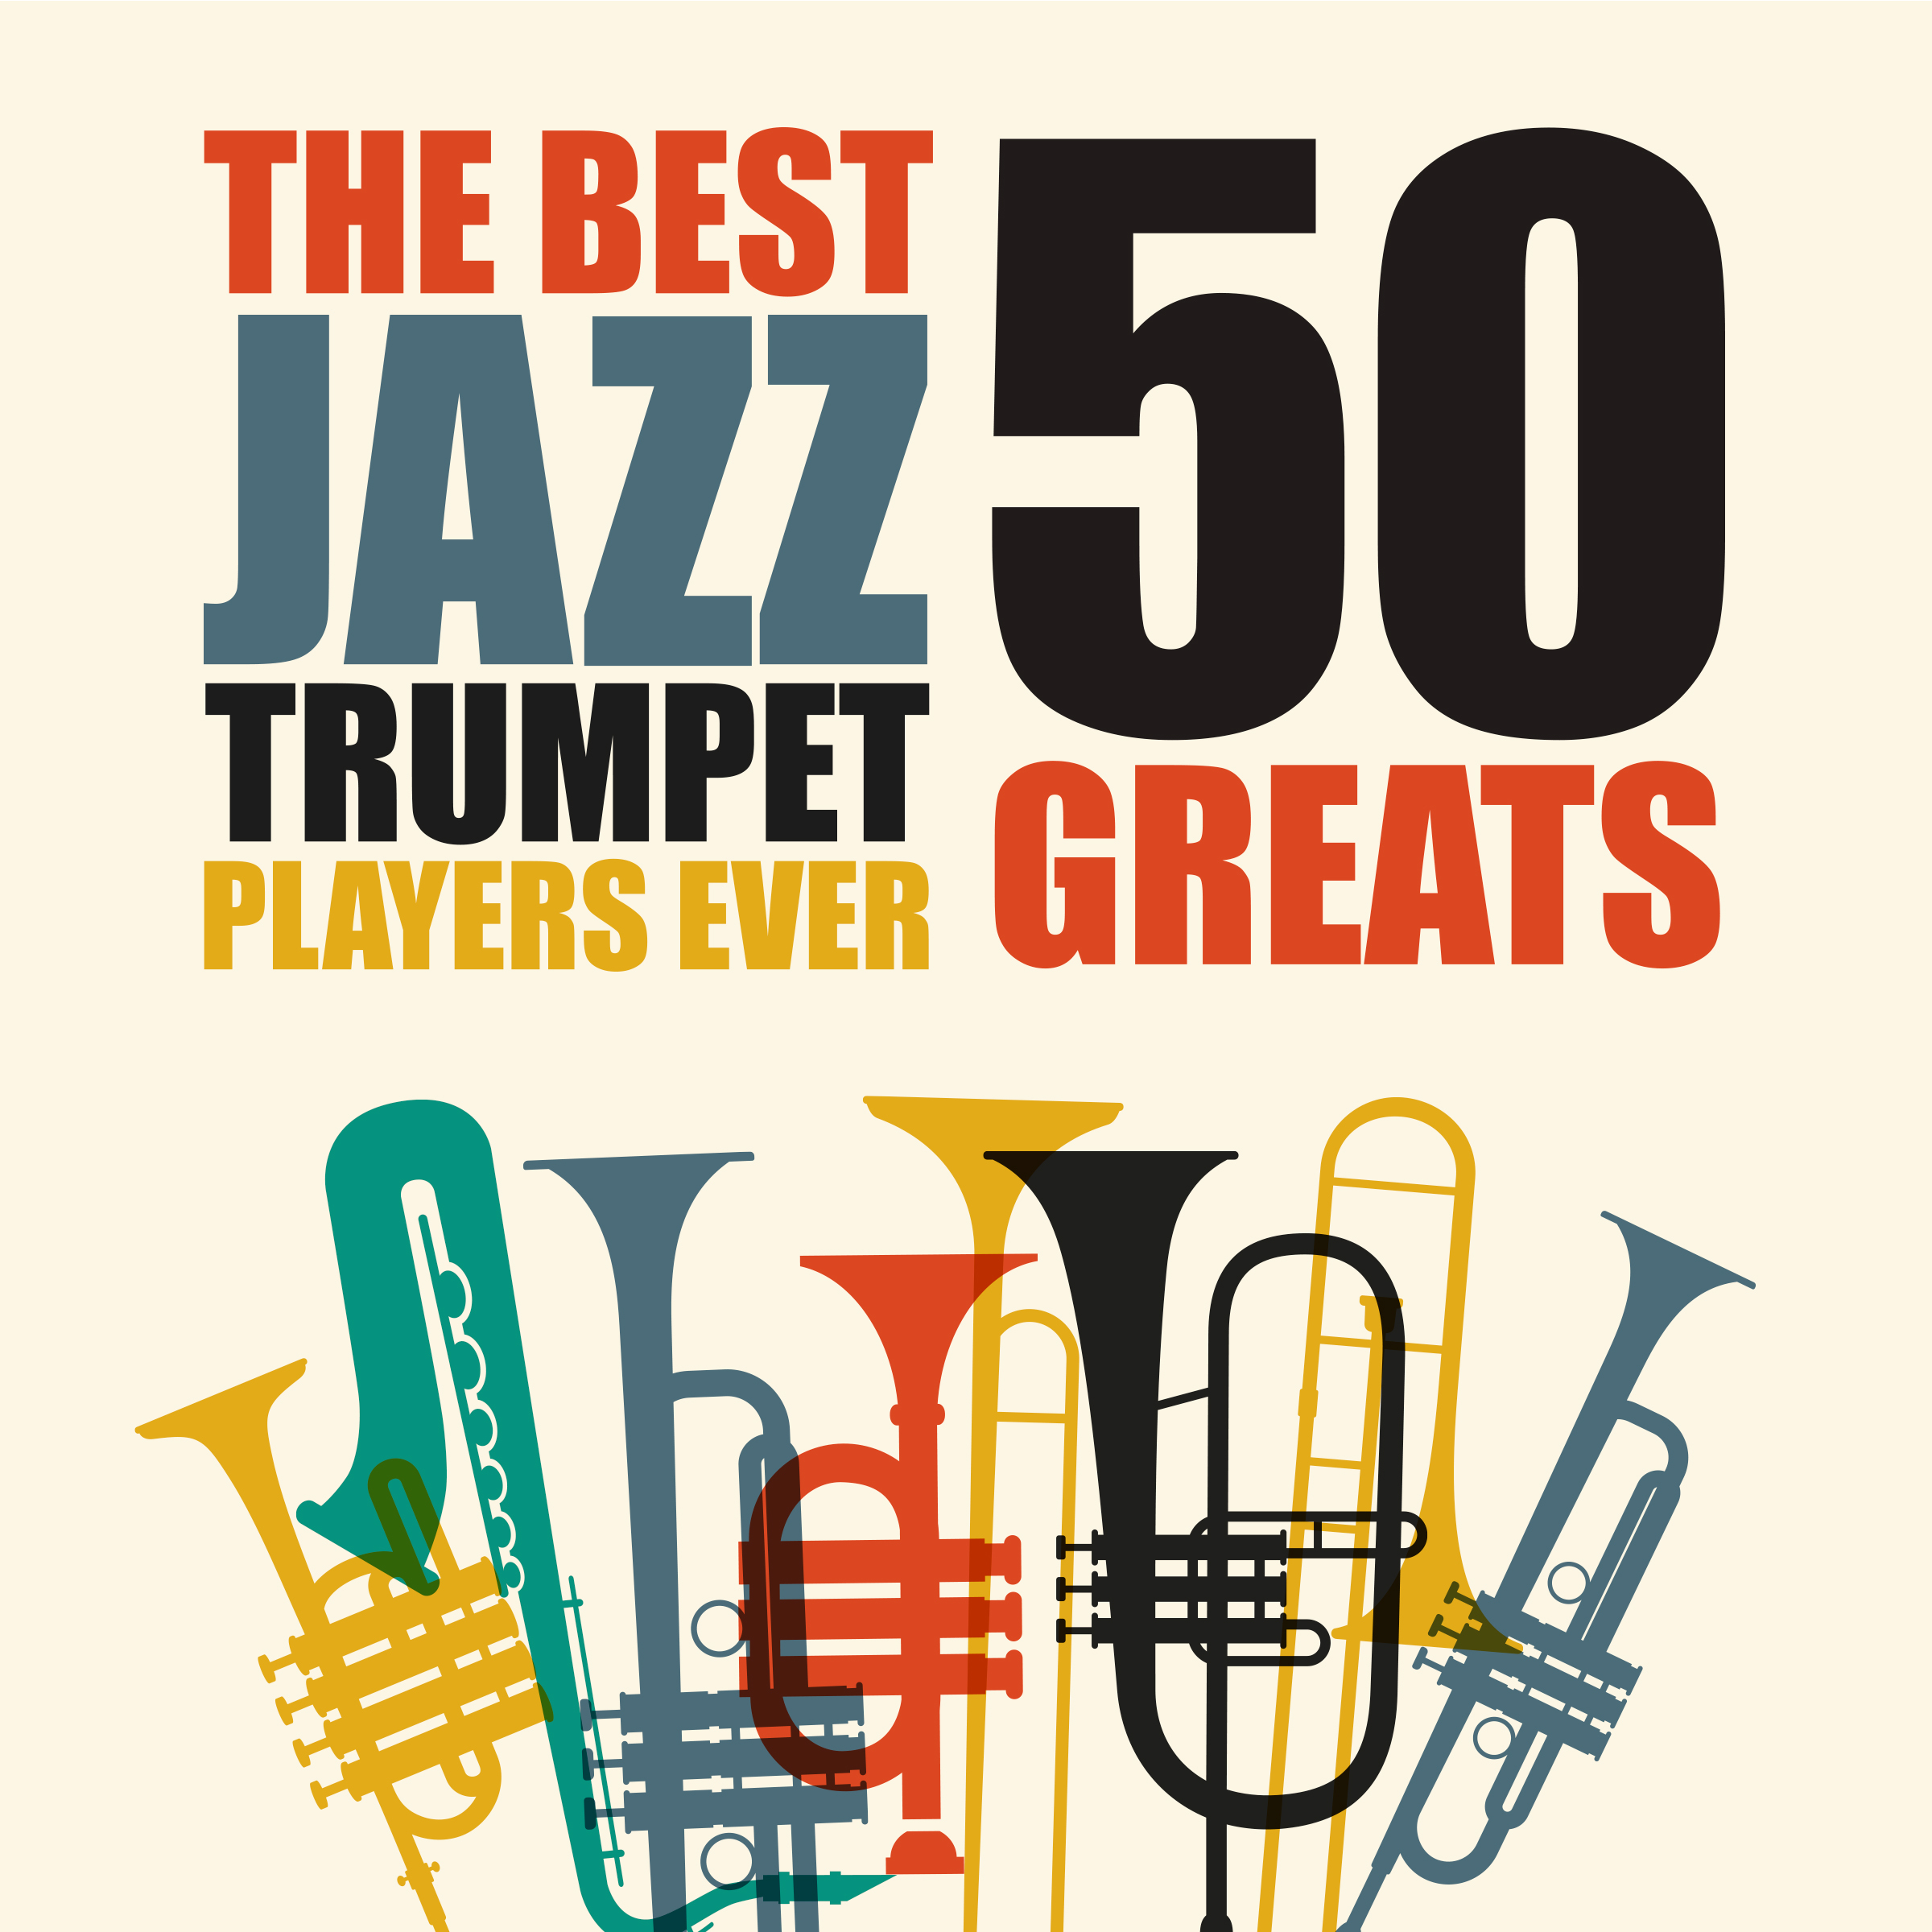 The Best Jazz Trumpet Players Ever - 50 Greats